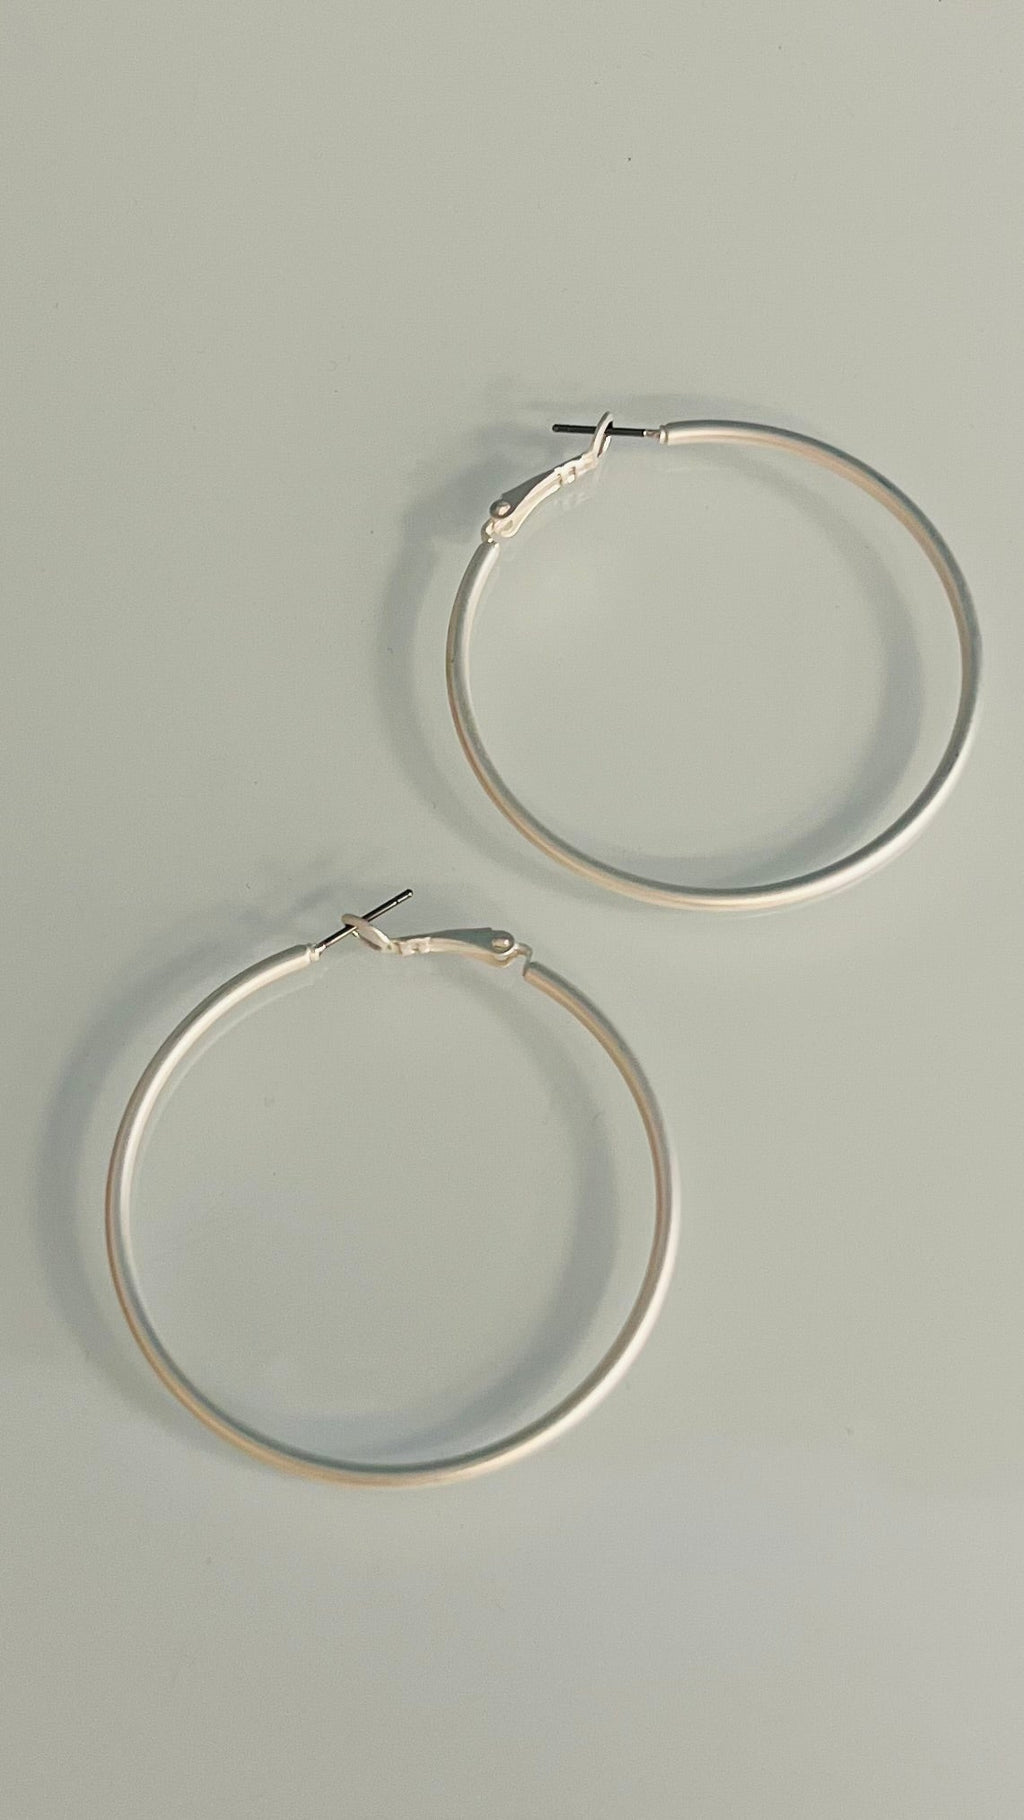 Our Cleopatra Silver Hoops earrings are sure to make a bold statement! These 50mm, silver matte hoops will give your look a sophisticated and chic vibe thanks to the timeless style of the hoop! Perfect to make any outfit pop like royalty, you'll be making heads turn with these bad boys! 1 3/4" in diameter